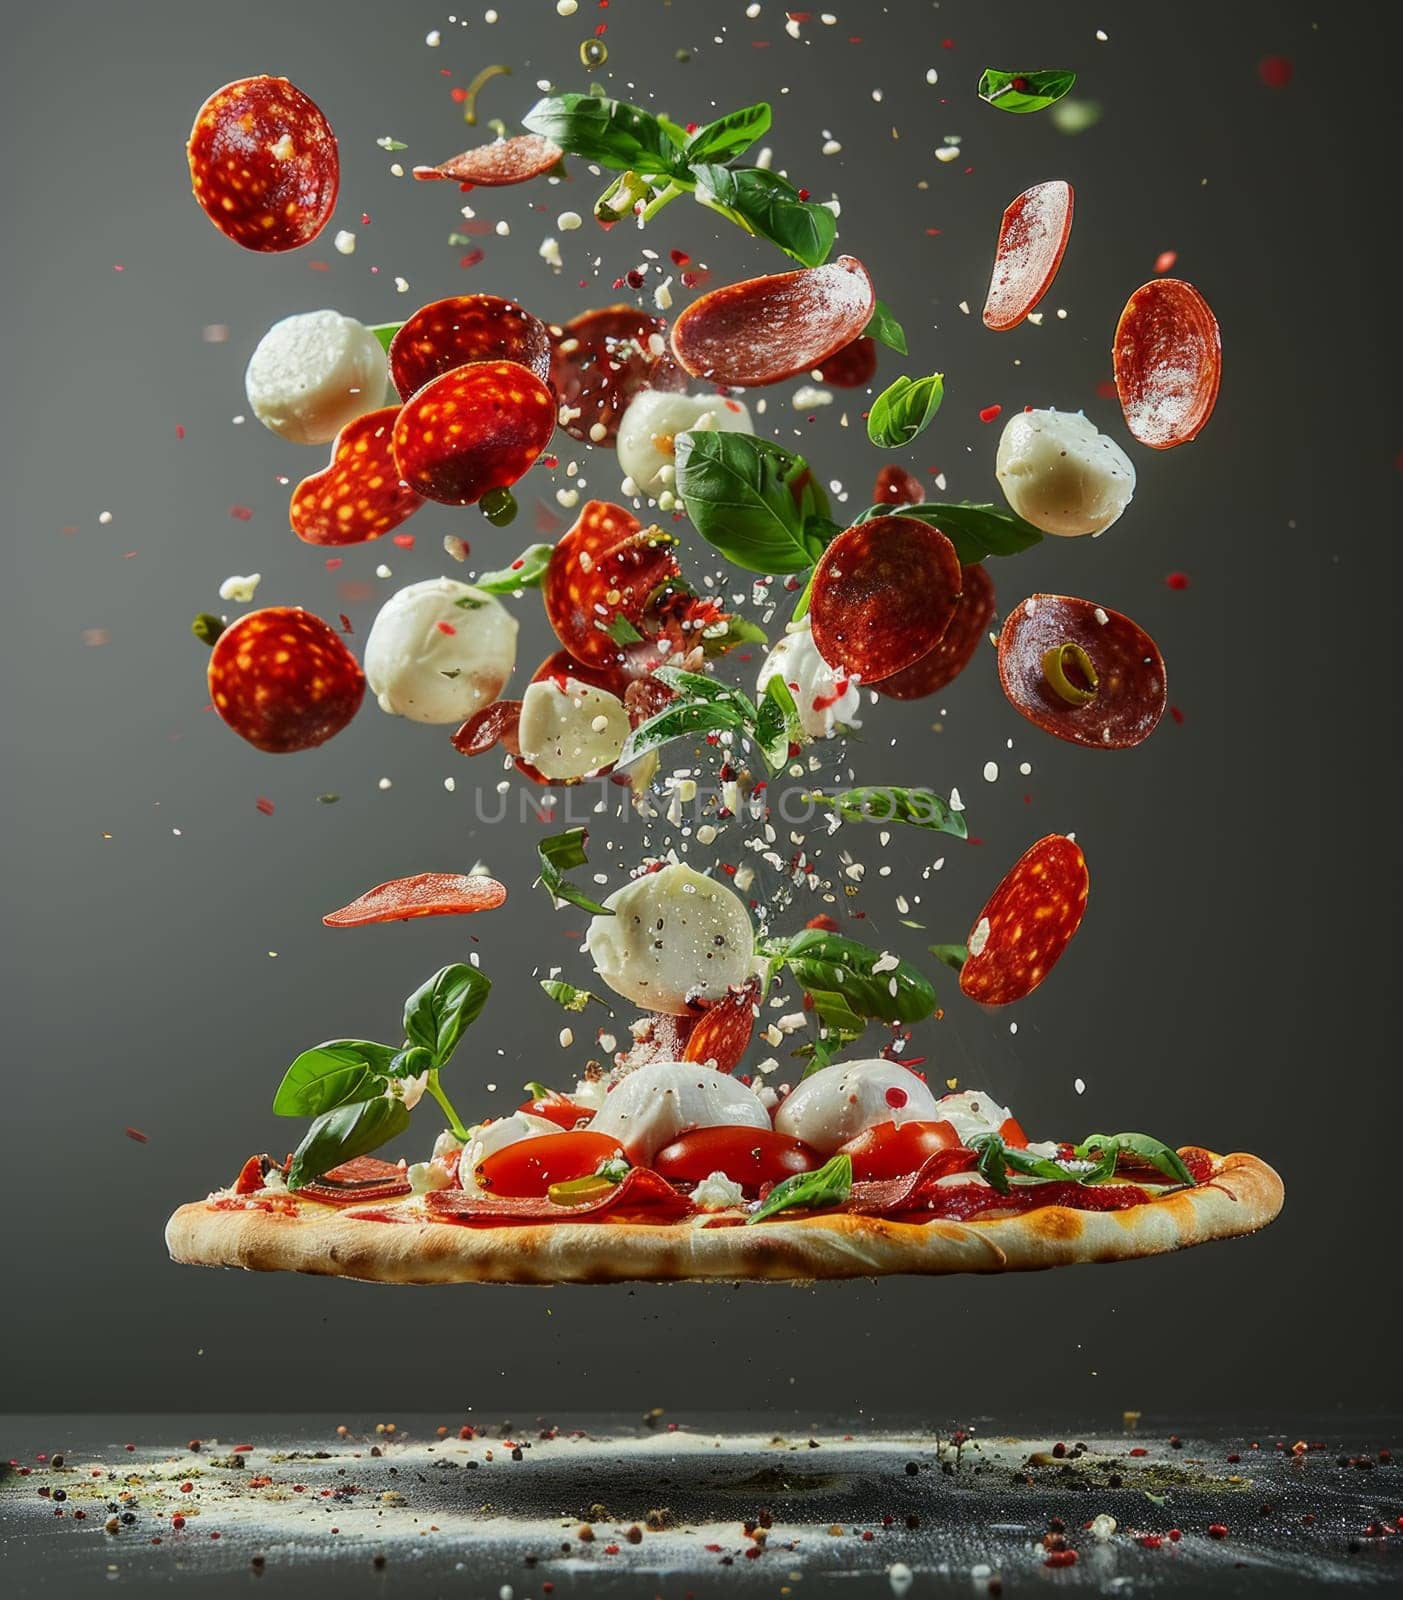 Dynamic pizza ingredients tomato, cheese, basil, pepperoni, and mozzarella balls float mid-air in a captivating culinary composition. Levitation photography captures the essence of Italian cuisine. by iliris